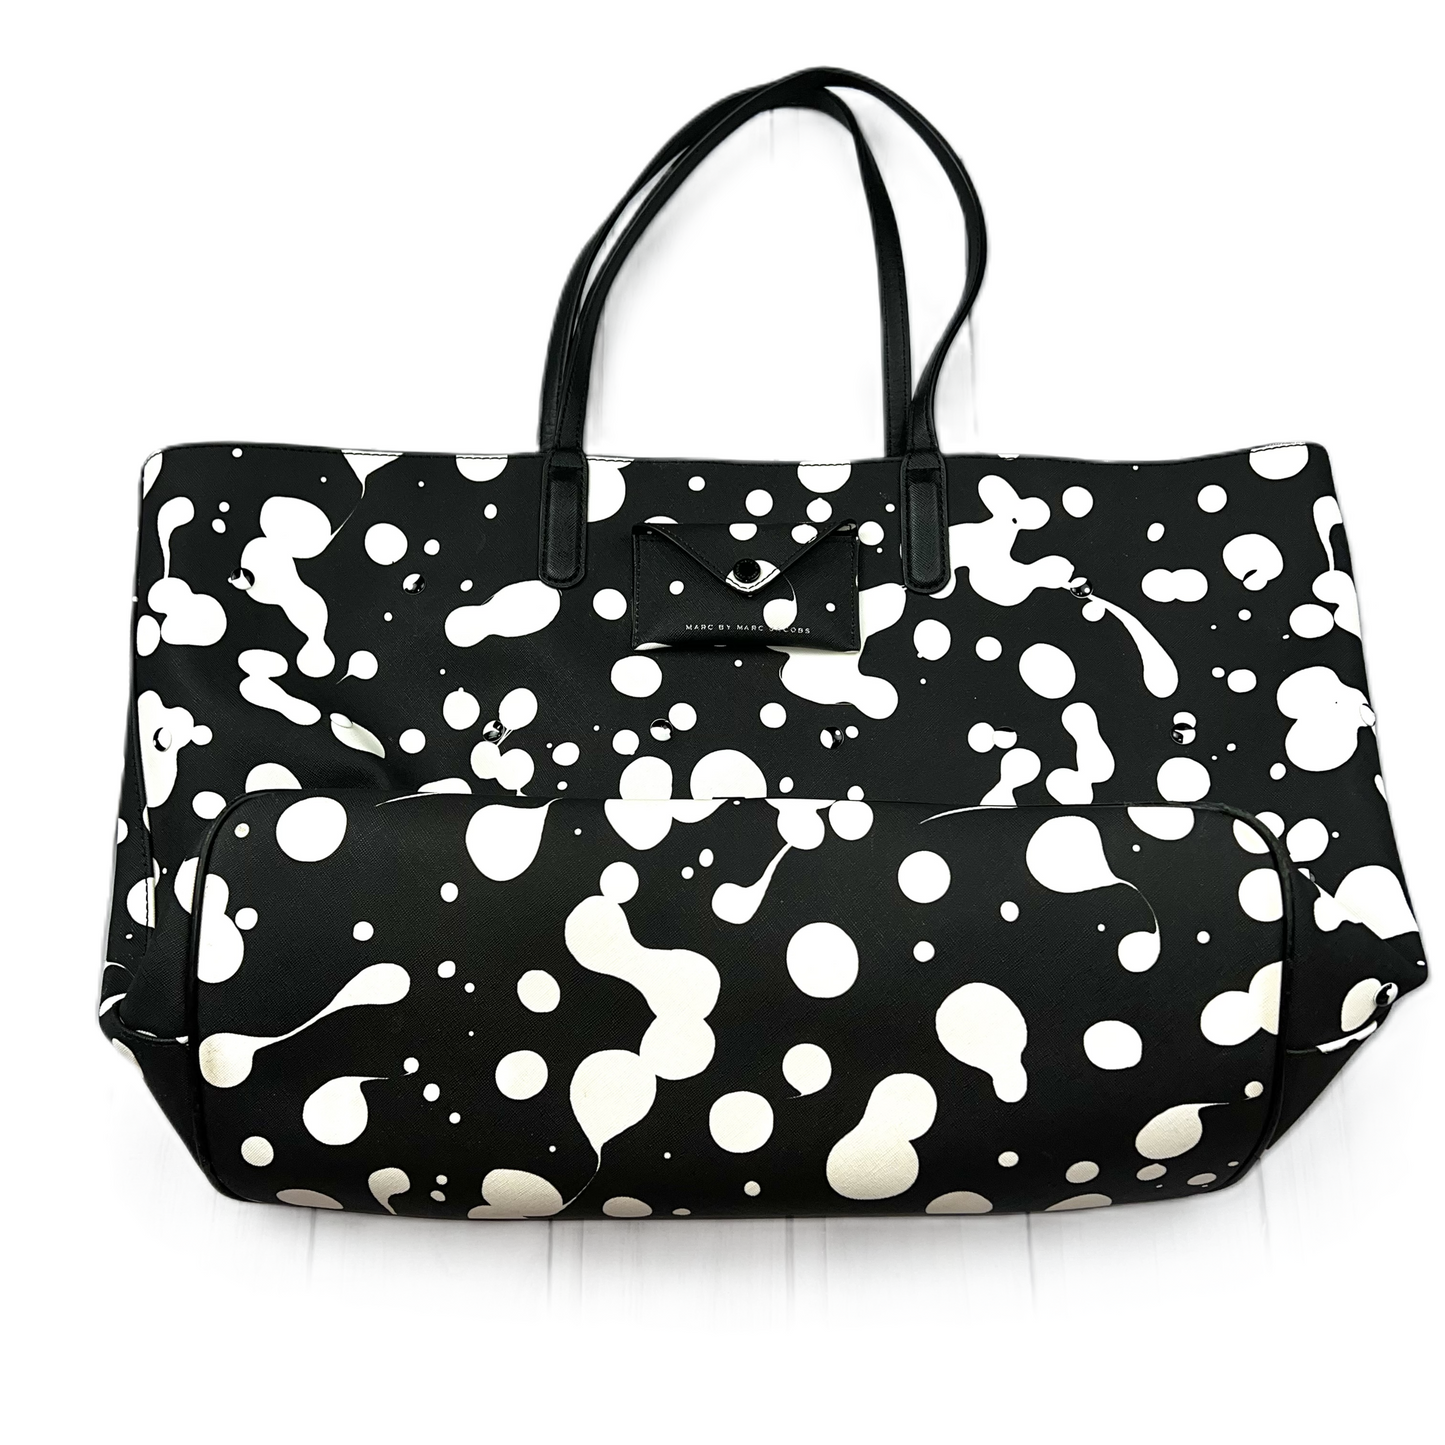 Tote Designer By Marc By Marc Jacobs, Size: Large